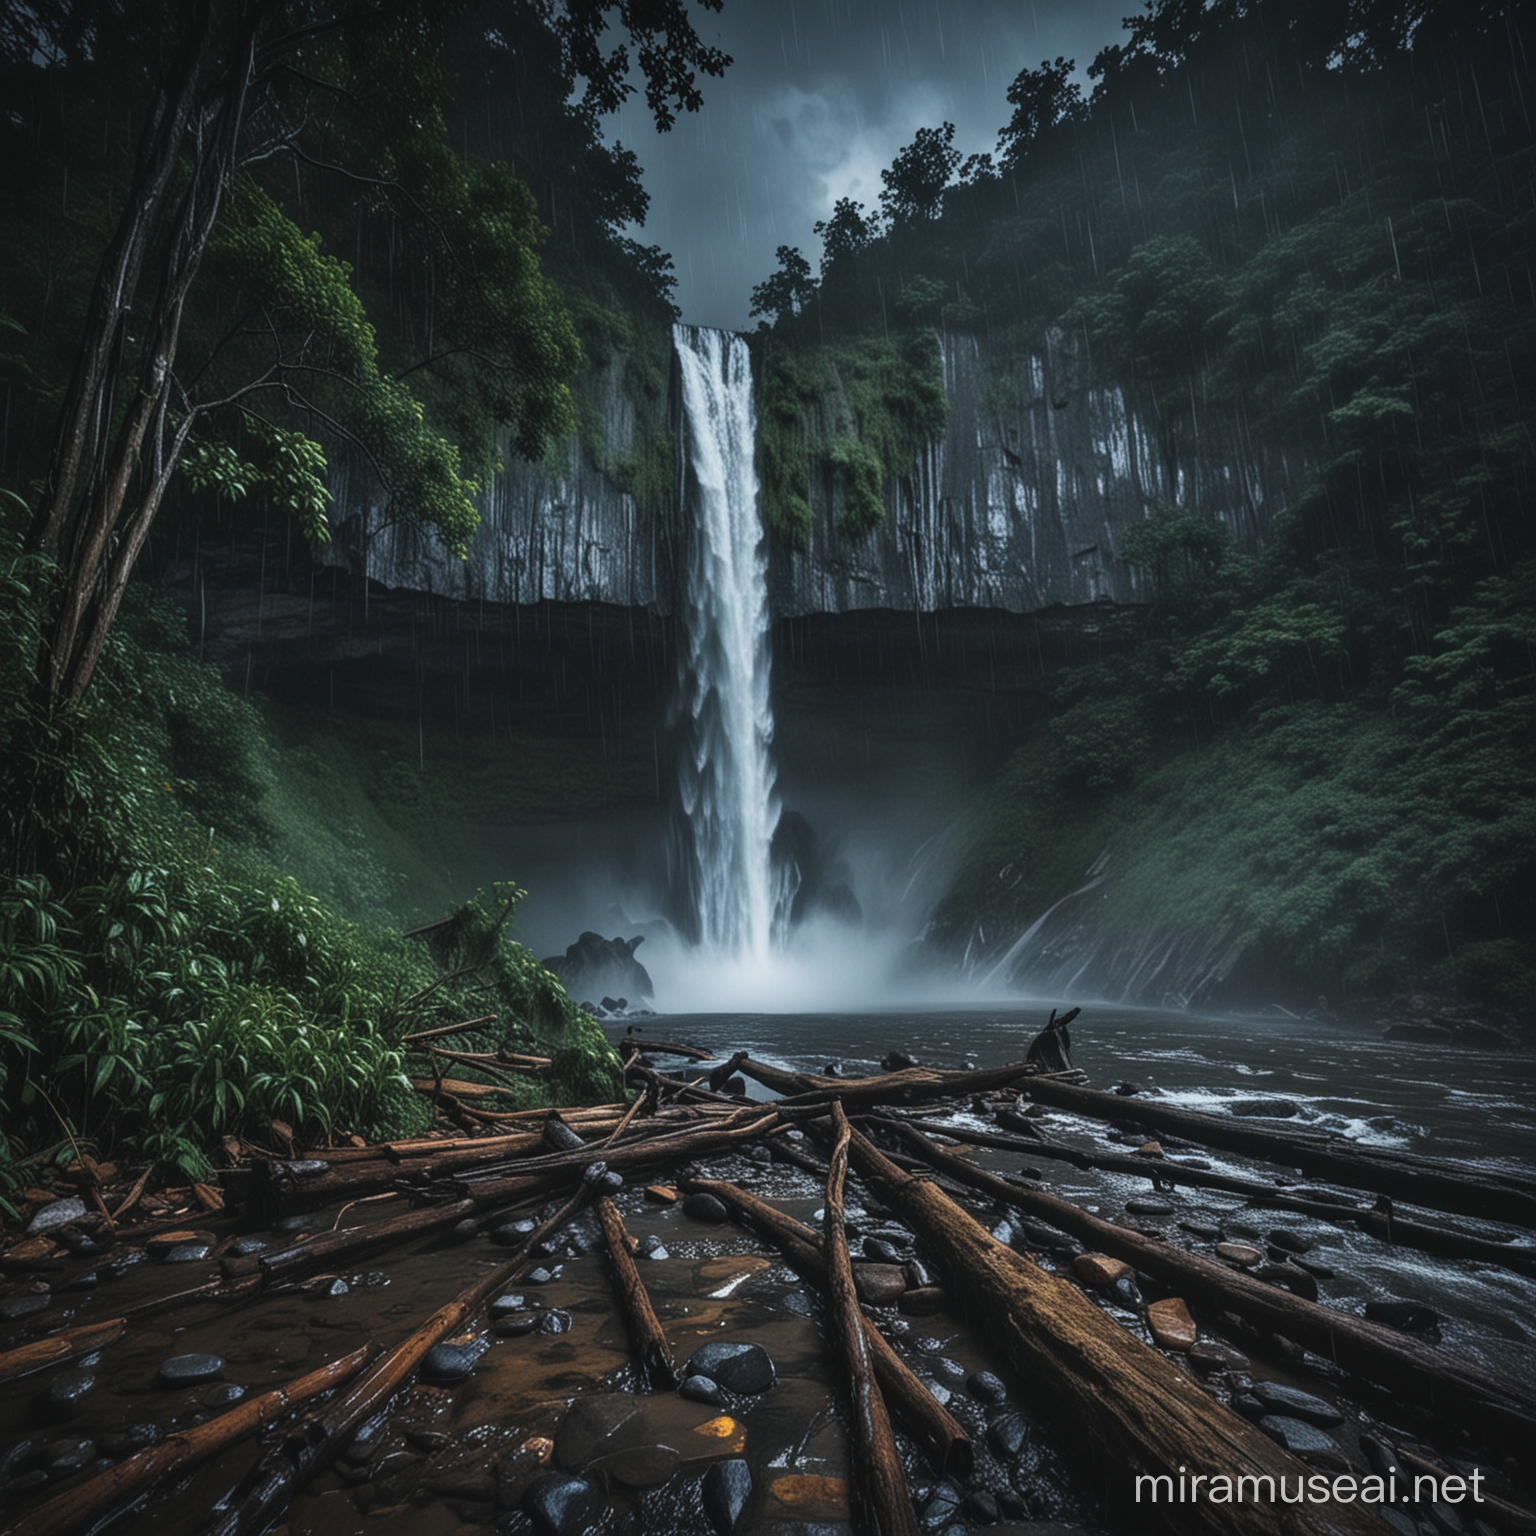 Mystical Waterfall Scene Rainy Night Landscape with Cascading Water